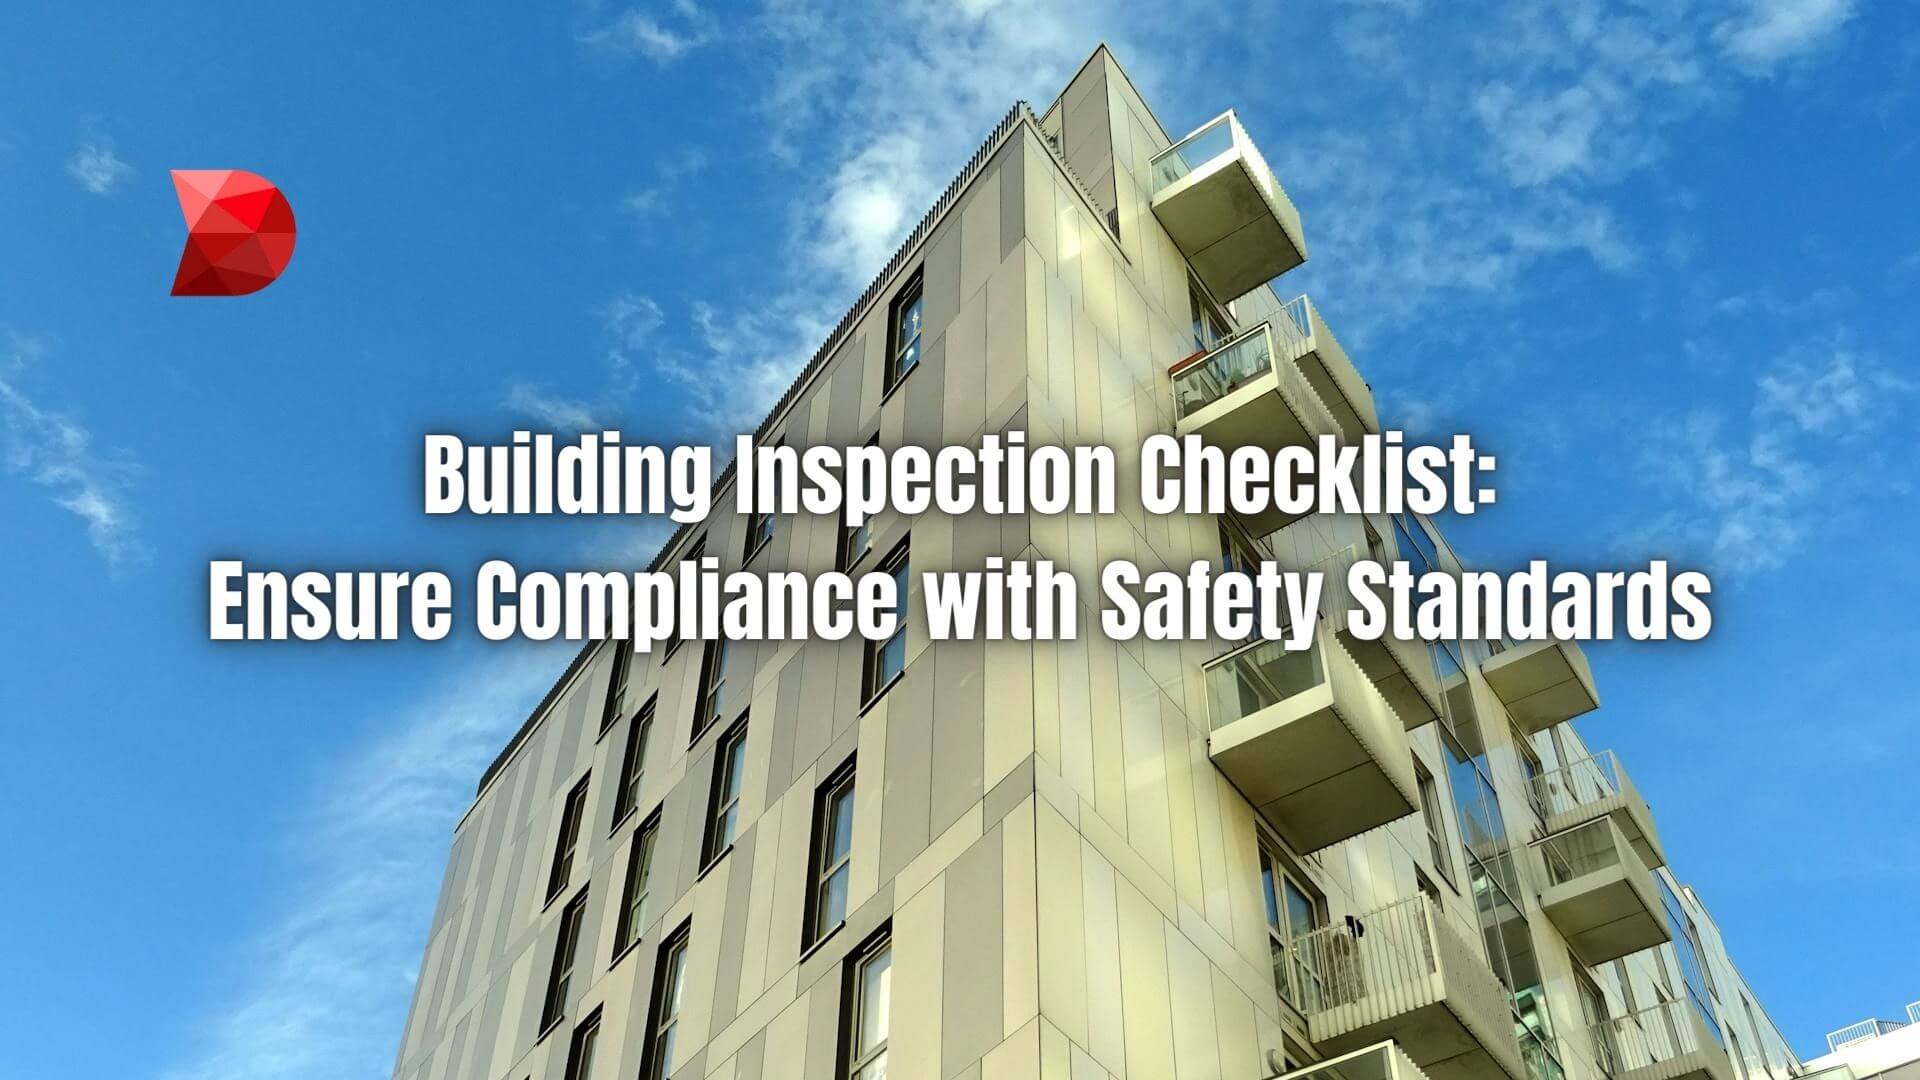 Master the essentials of building inspection checklists. Learn how to ensure safety compliance effortlessly with expert tips and checklists.